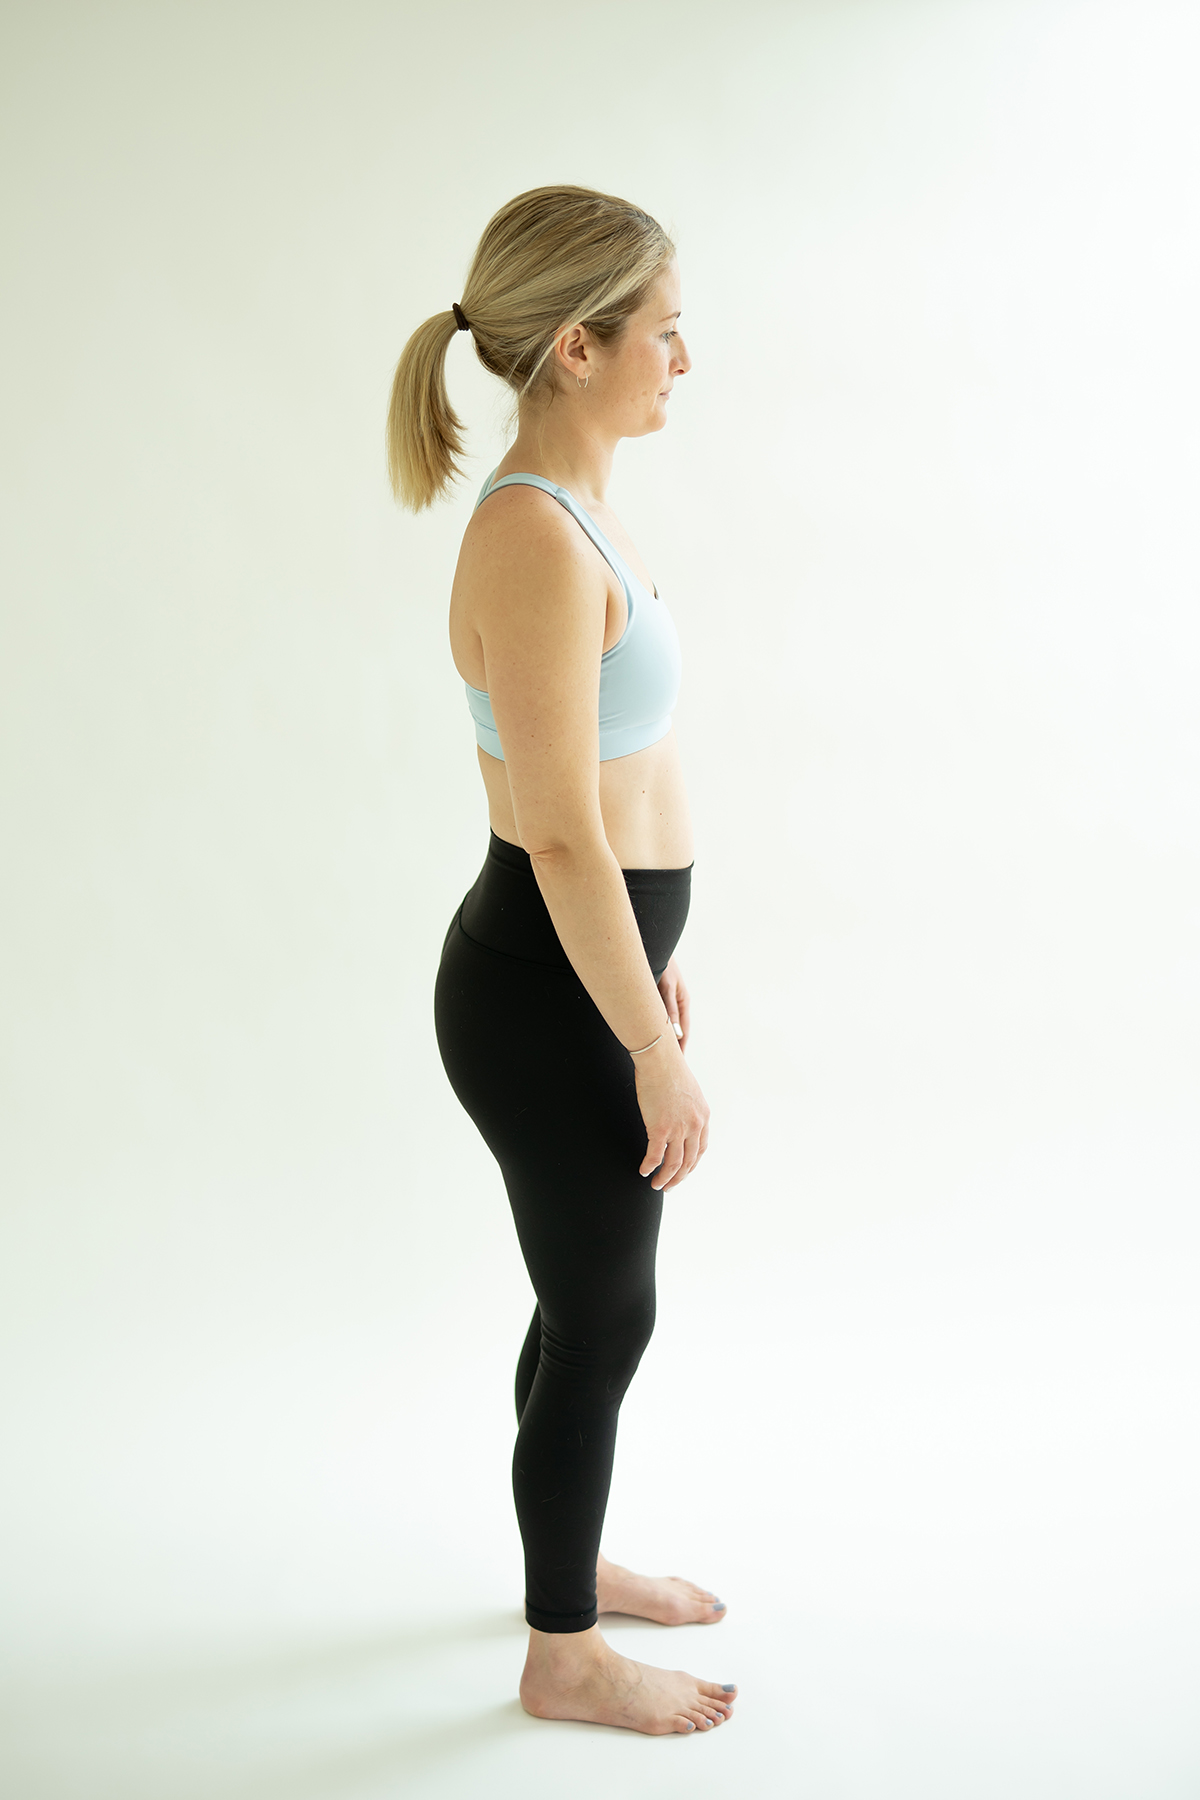 Bad posture, hips out of alignment